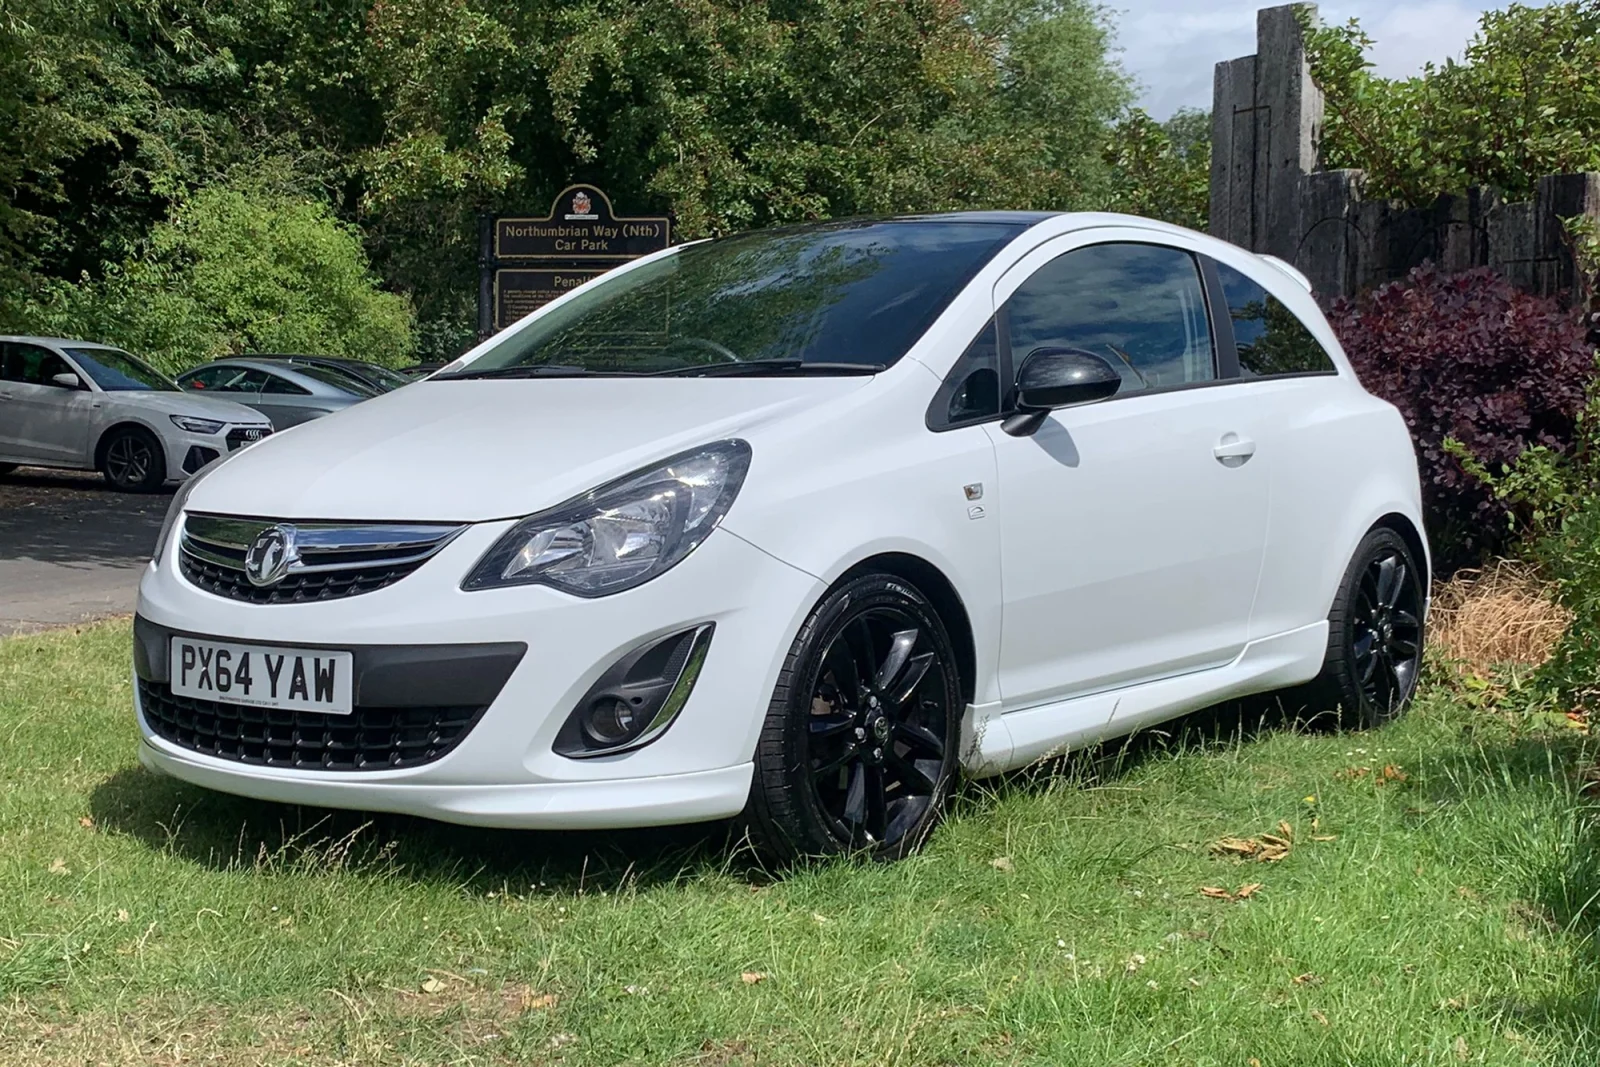 Vauxhall-Corsa-Limited-Edition-scaled.webp